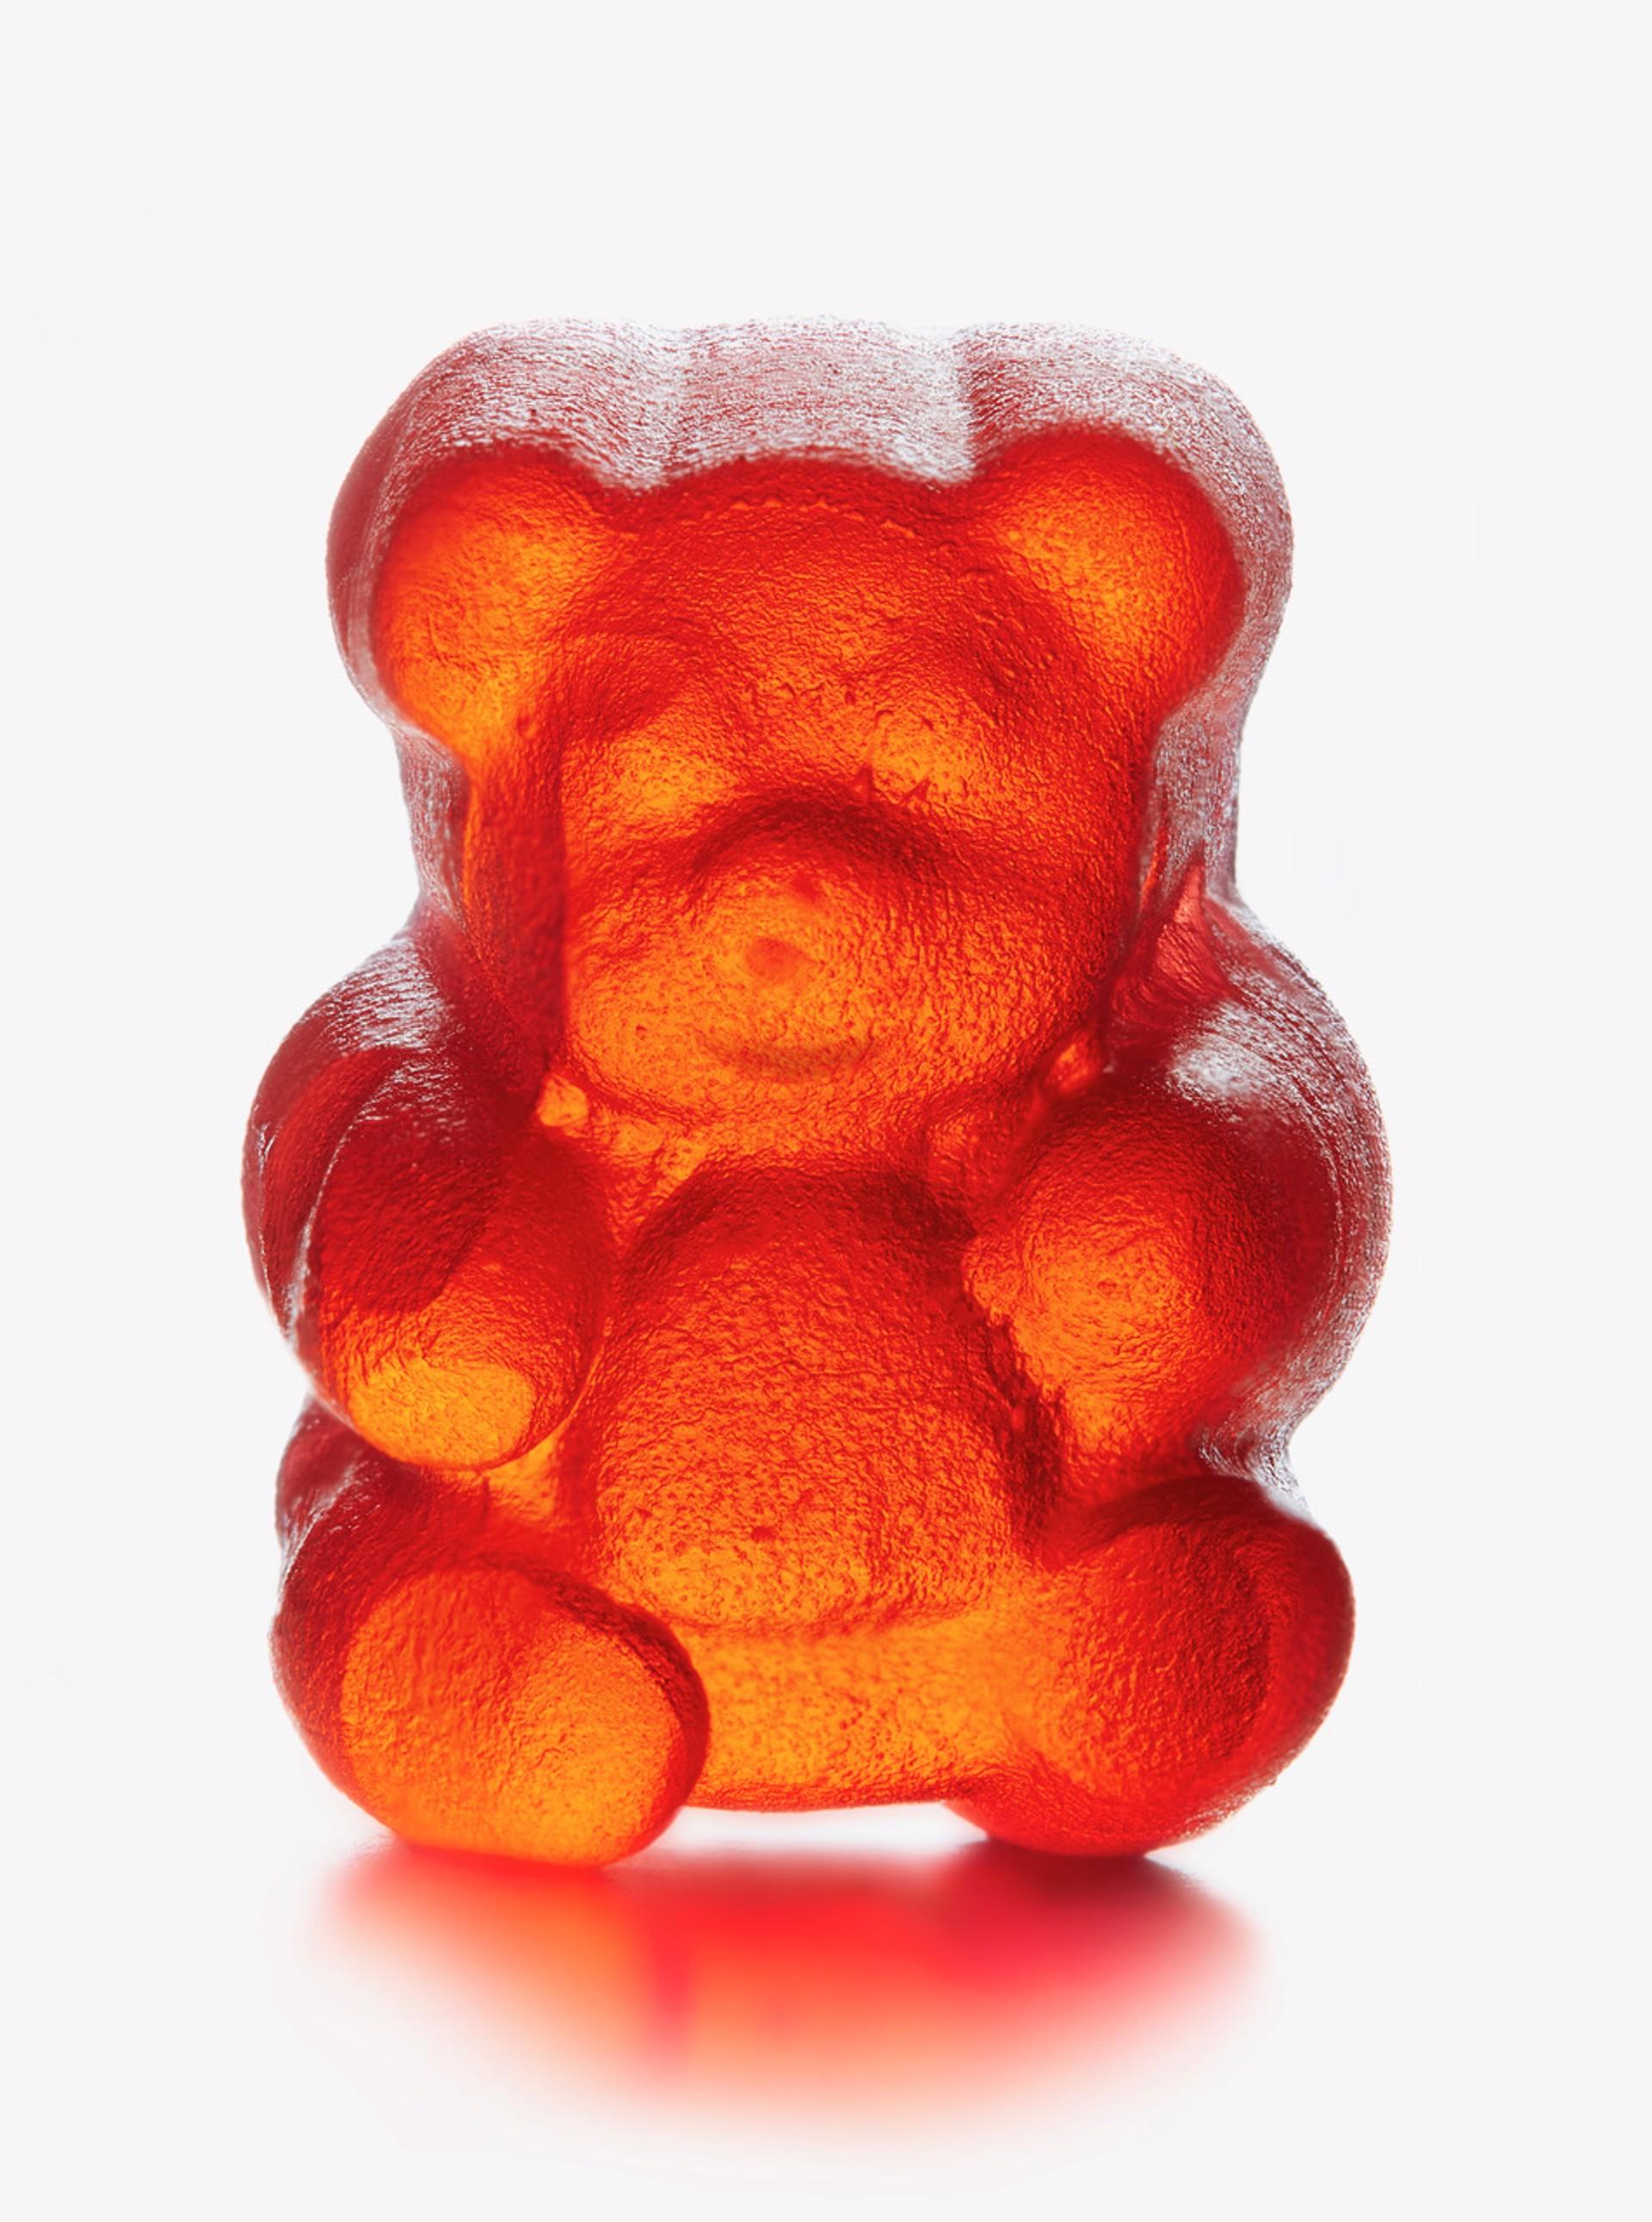 Gummy Bear Red
Digital C-Print / Archival Pigment Print
Edition of 5 per size
Available sizes:
24 x 18 in
36 x 24 in
48 x 36 in

Refine Sugar Collection.

This photograph will be printed once payment has been received and will ship directly from the